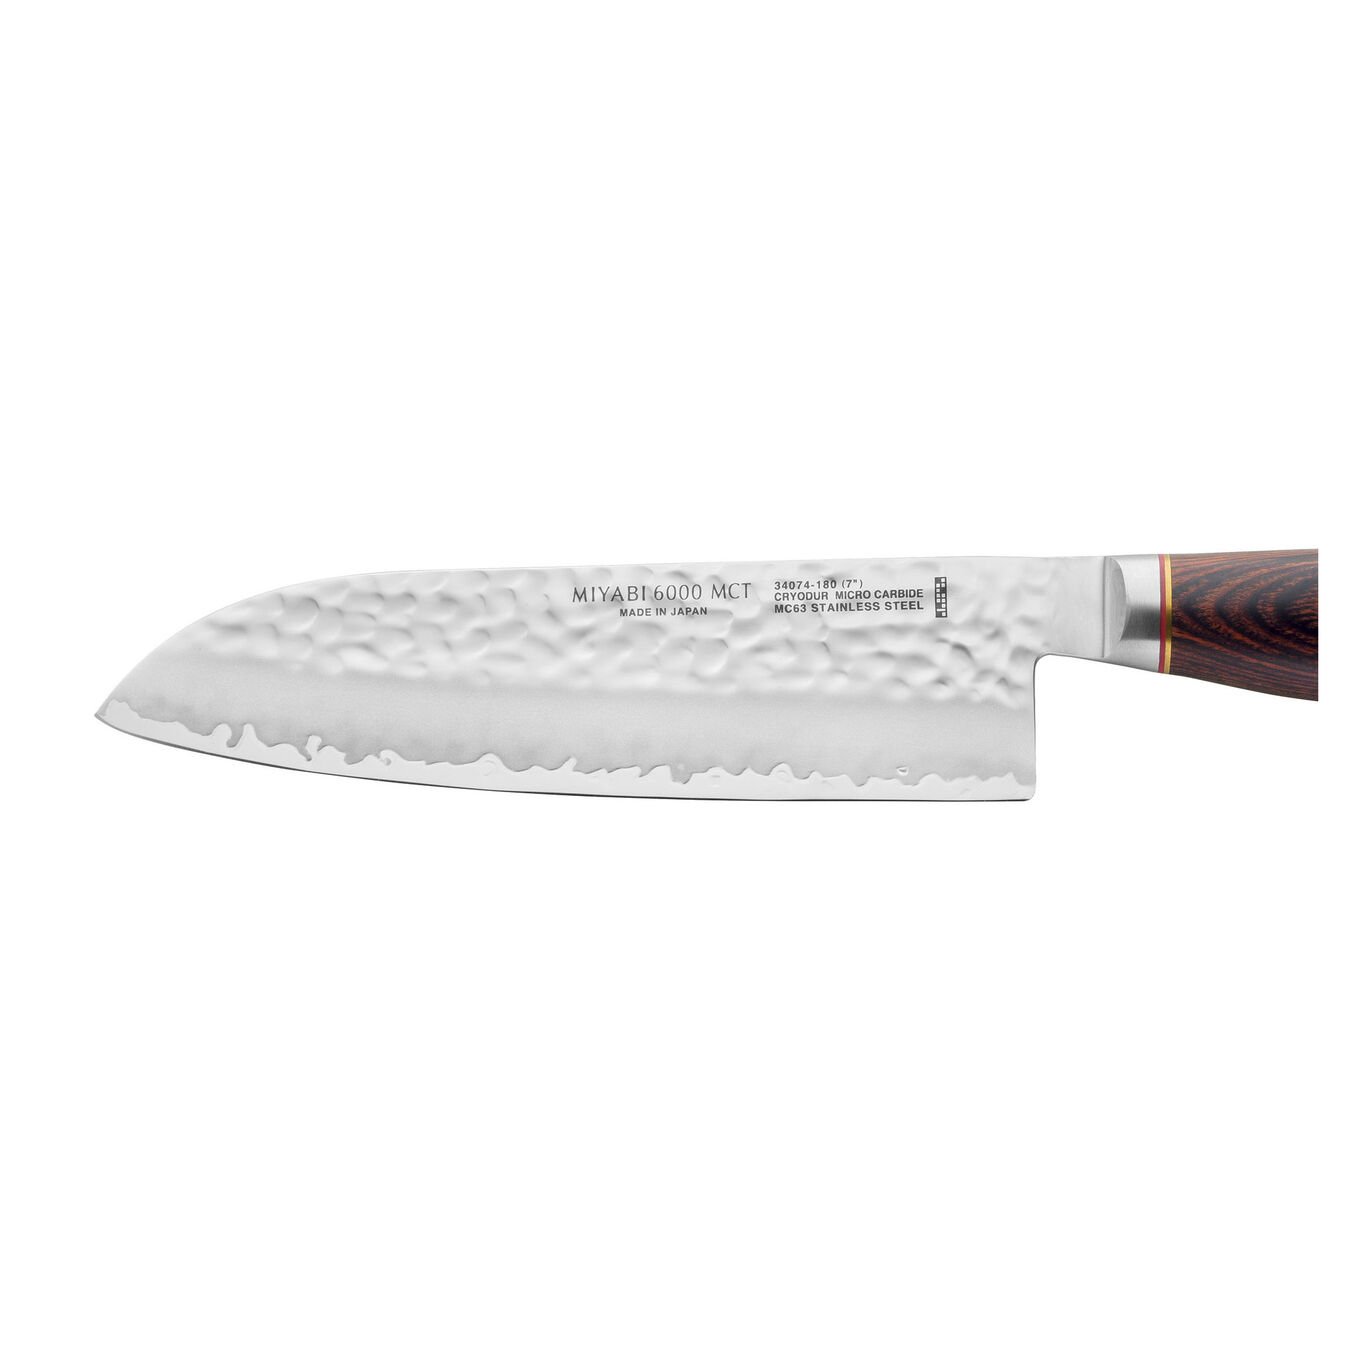 7 inch Santoku - Visual Imperfections,,large 5